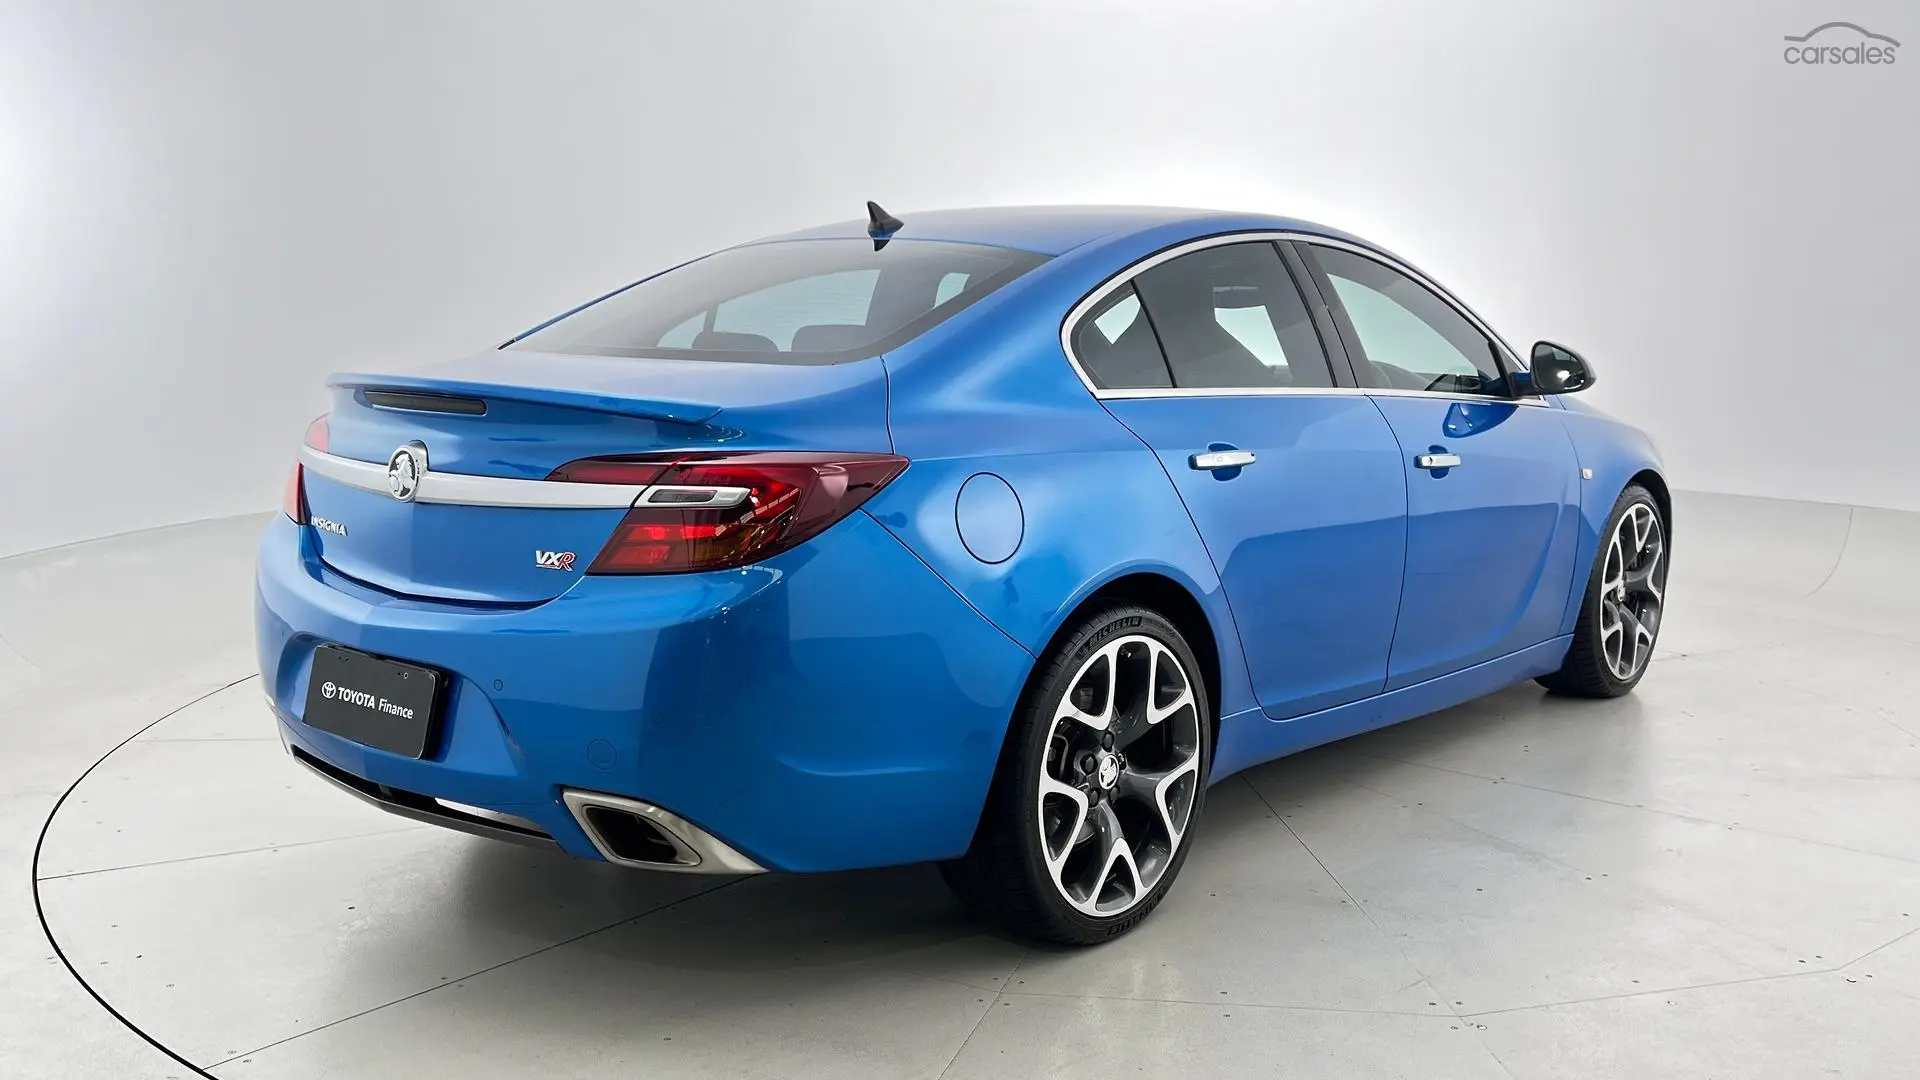 2015 Holden Insignia Image 4